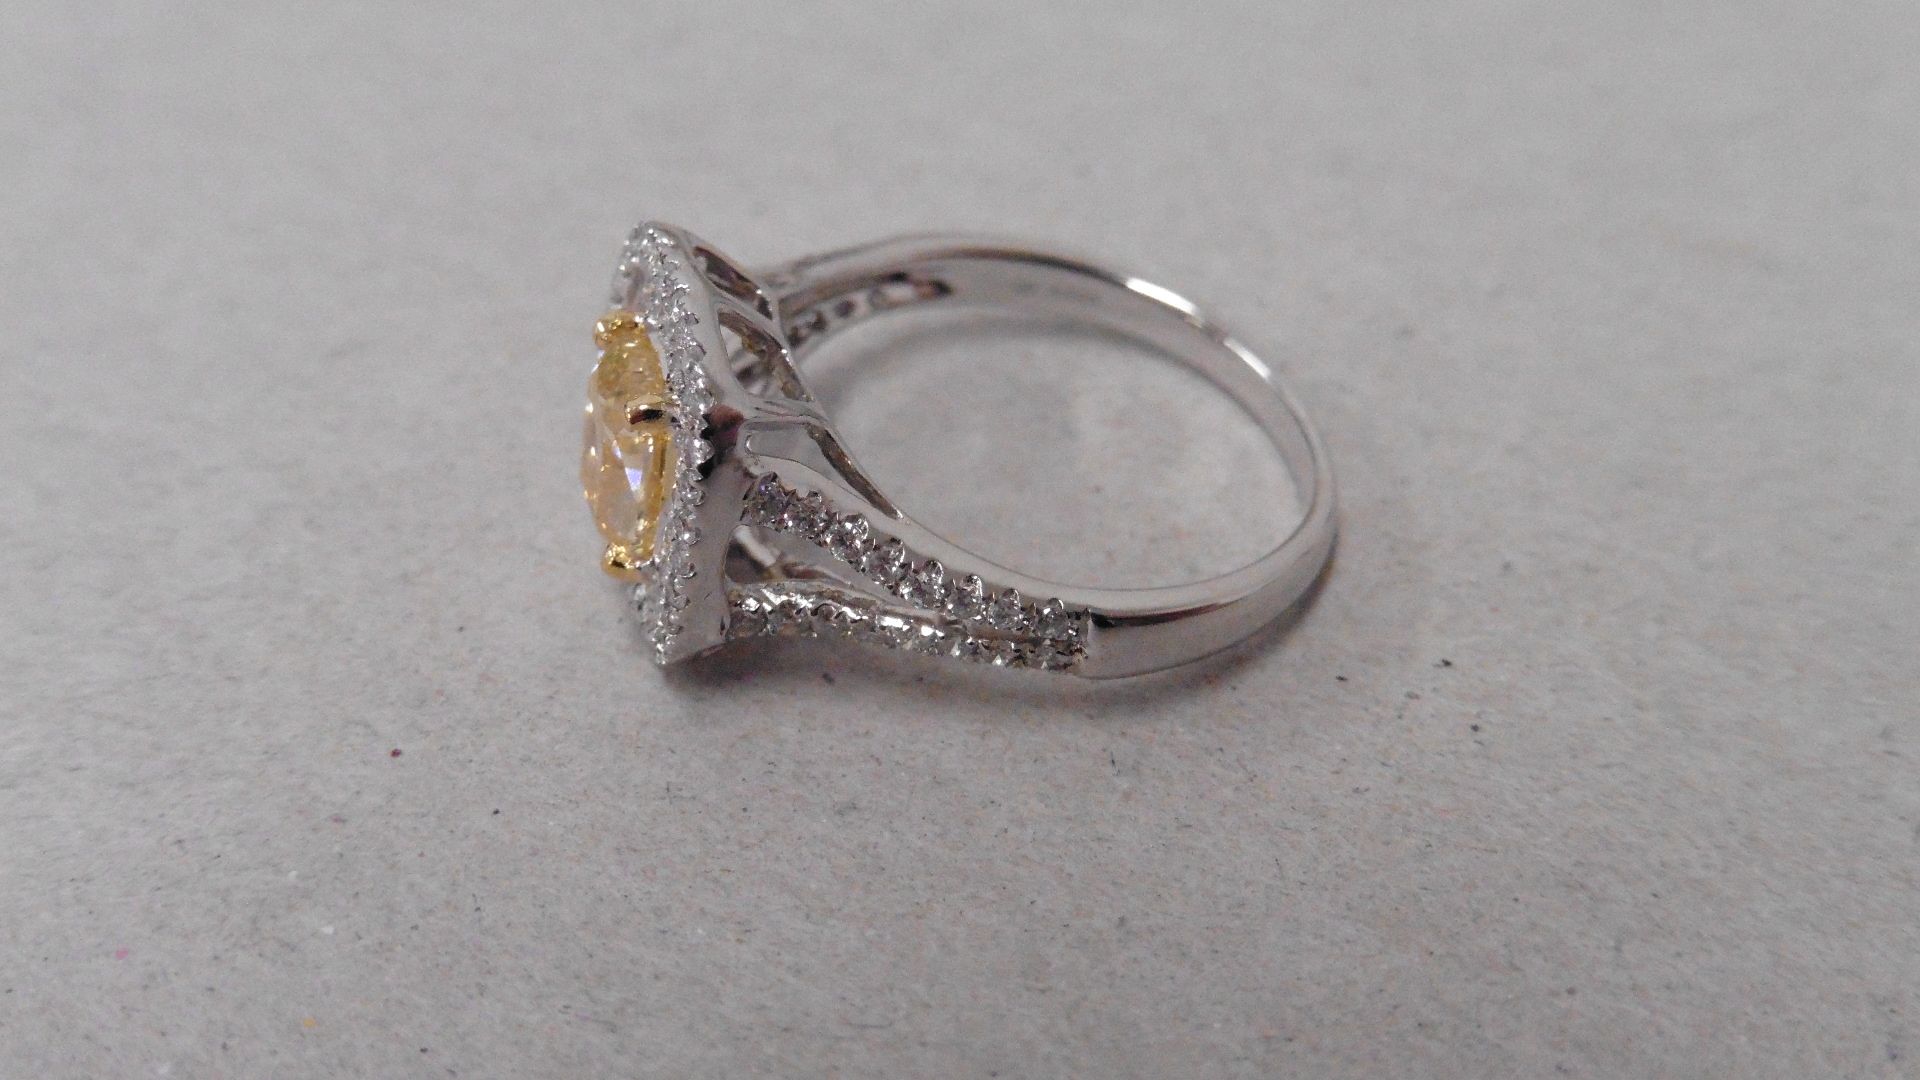 1.13ct diamond set solitaire ring. Yellow cushion cut diamond,Fancy yellow/green, Si1 clarity on GIA - Image 2 of 5